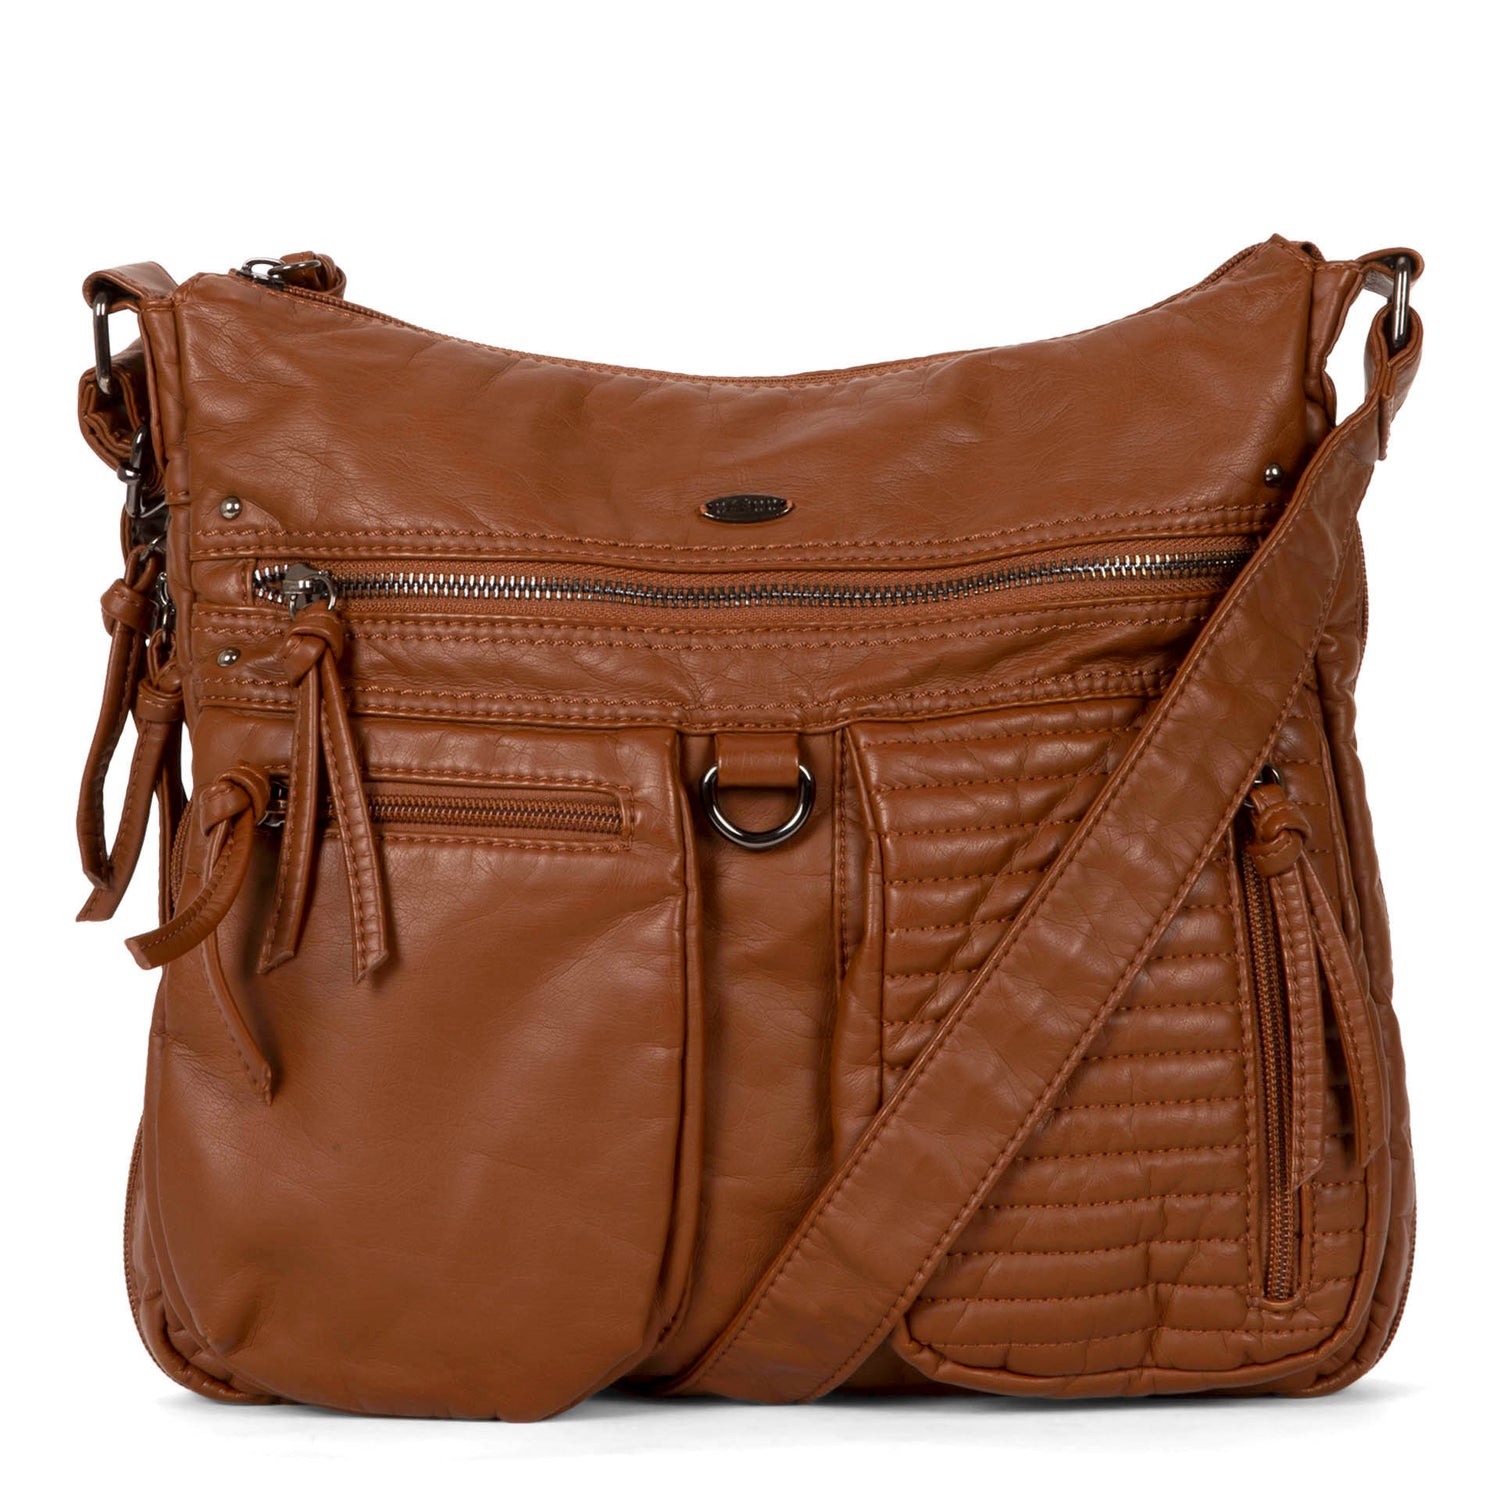 Medium Quilted Expandable Crossbody with Front Pockets - Bentley